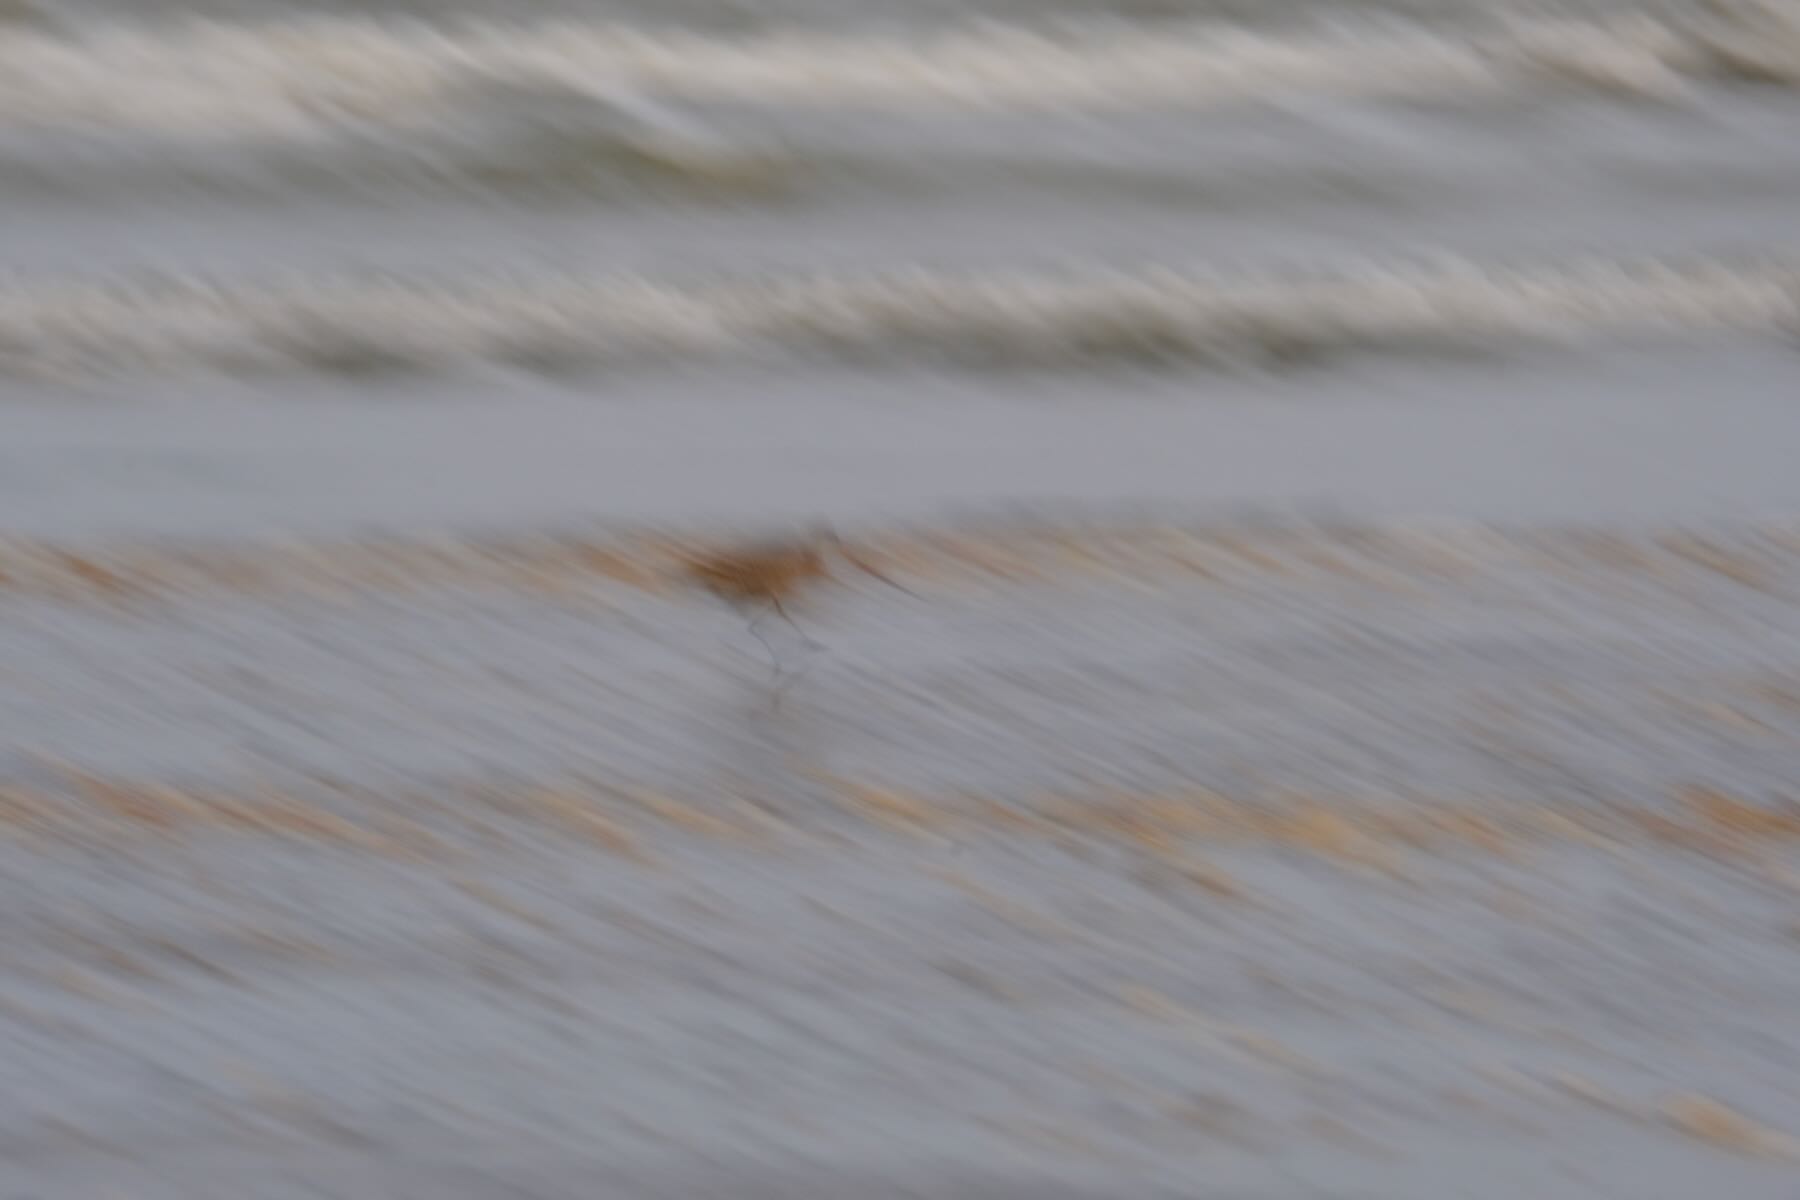 Blurry mess that was supposed to be a Godwit on the beach with waves in the background. 